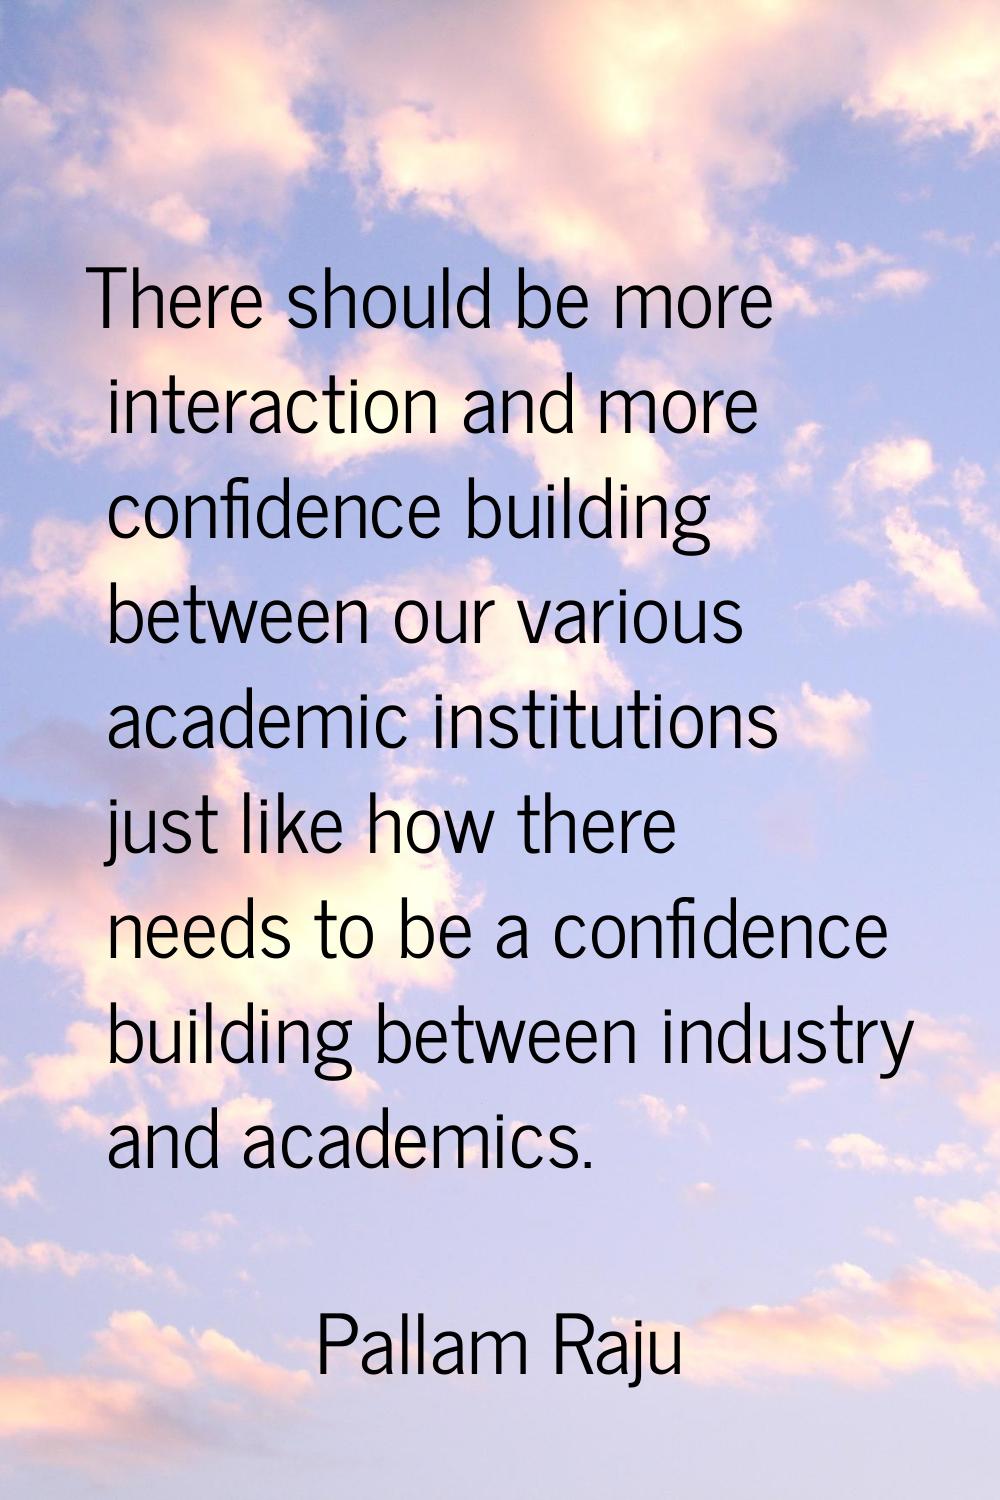 There should be more interaction and more confidence building between our various academic institut